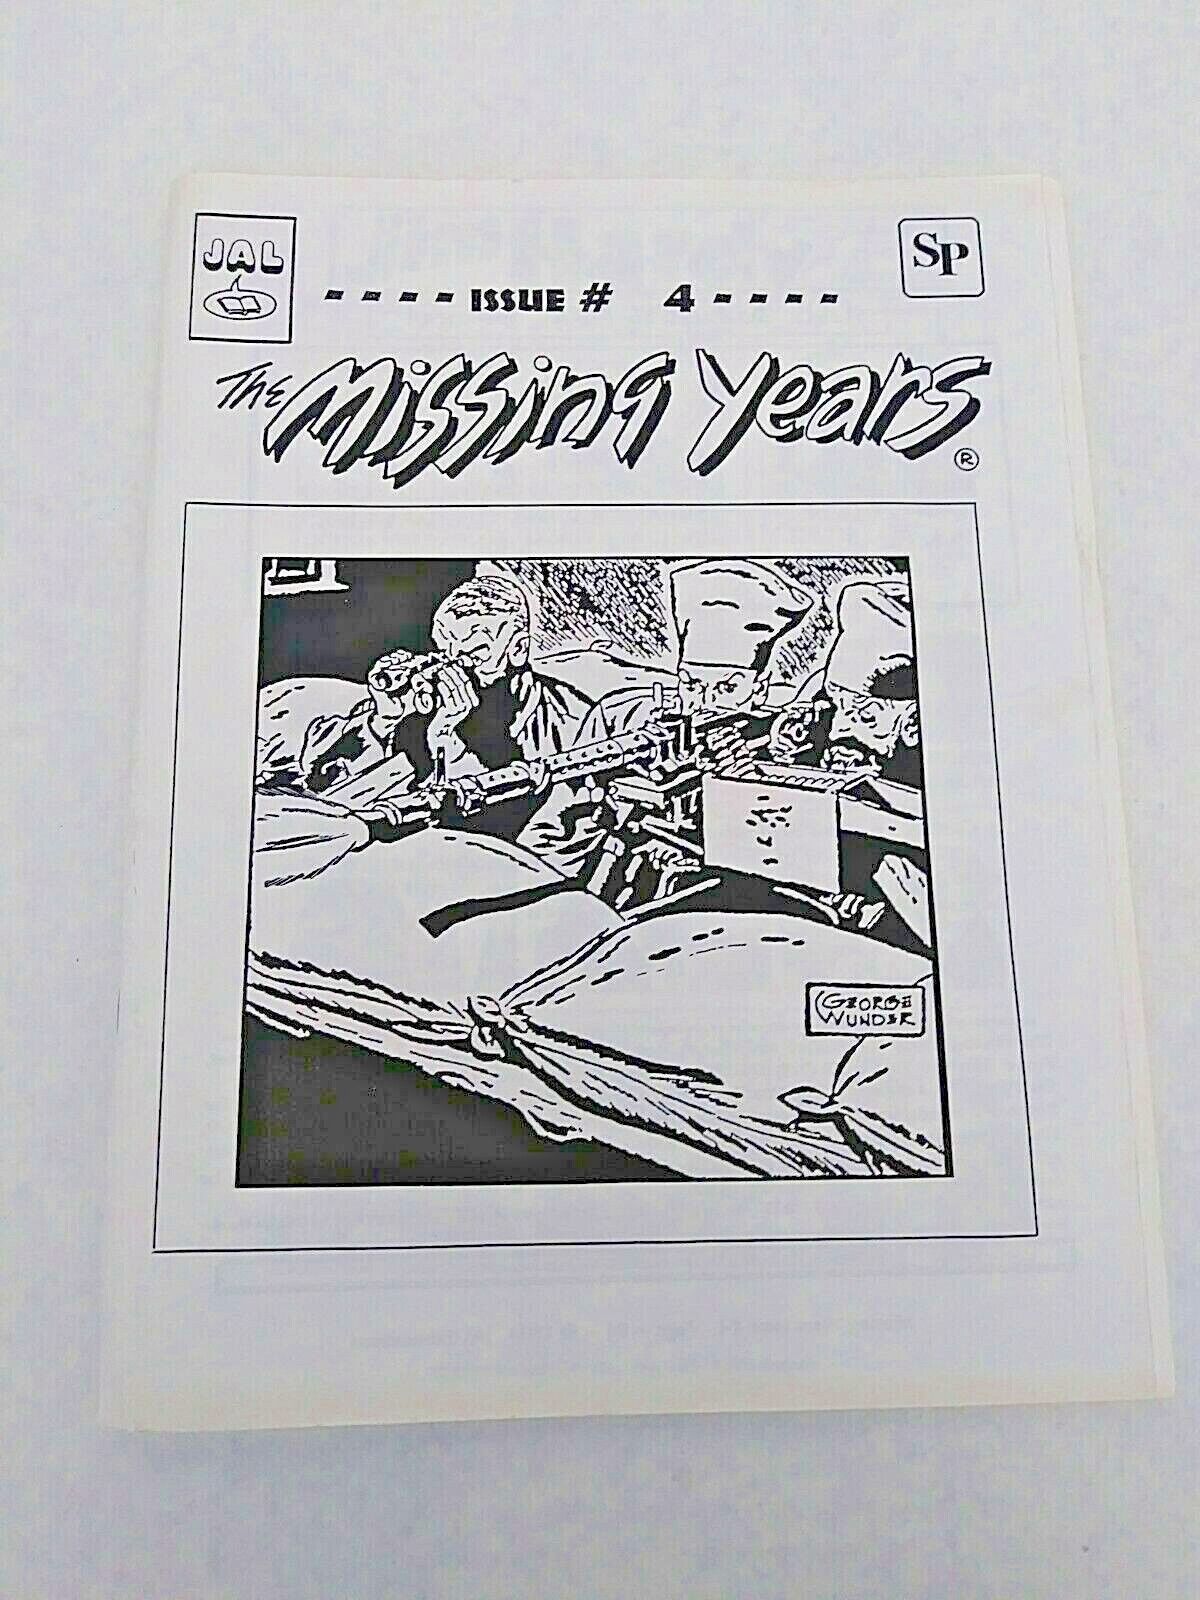 THE MISSING YEARS MAGAZINE COMICS ISSUE #4 SPEC PRODUCTIONS 1994 DICK TRACY-JAL